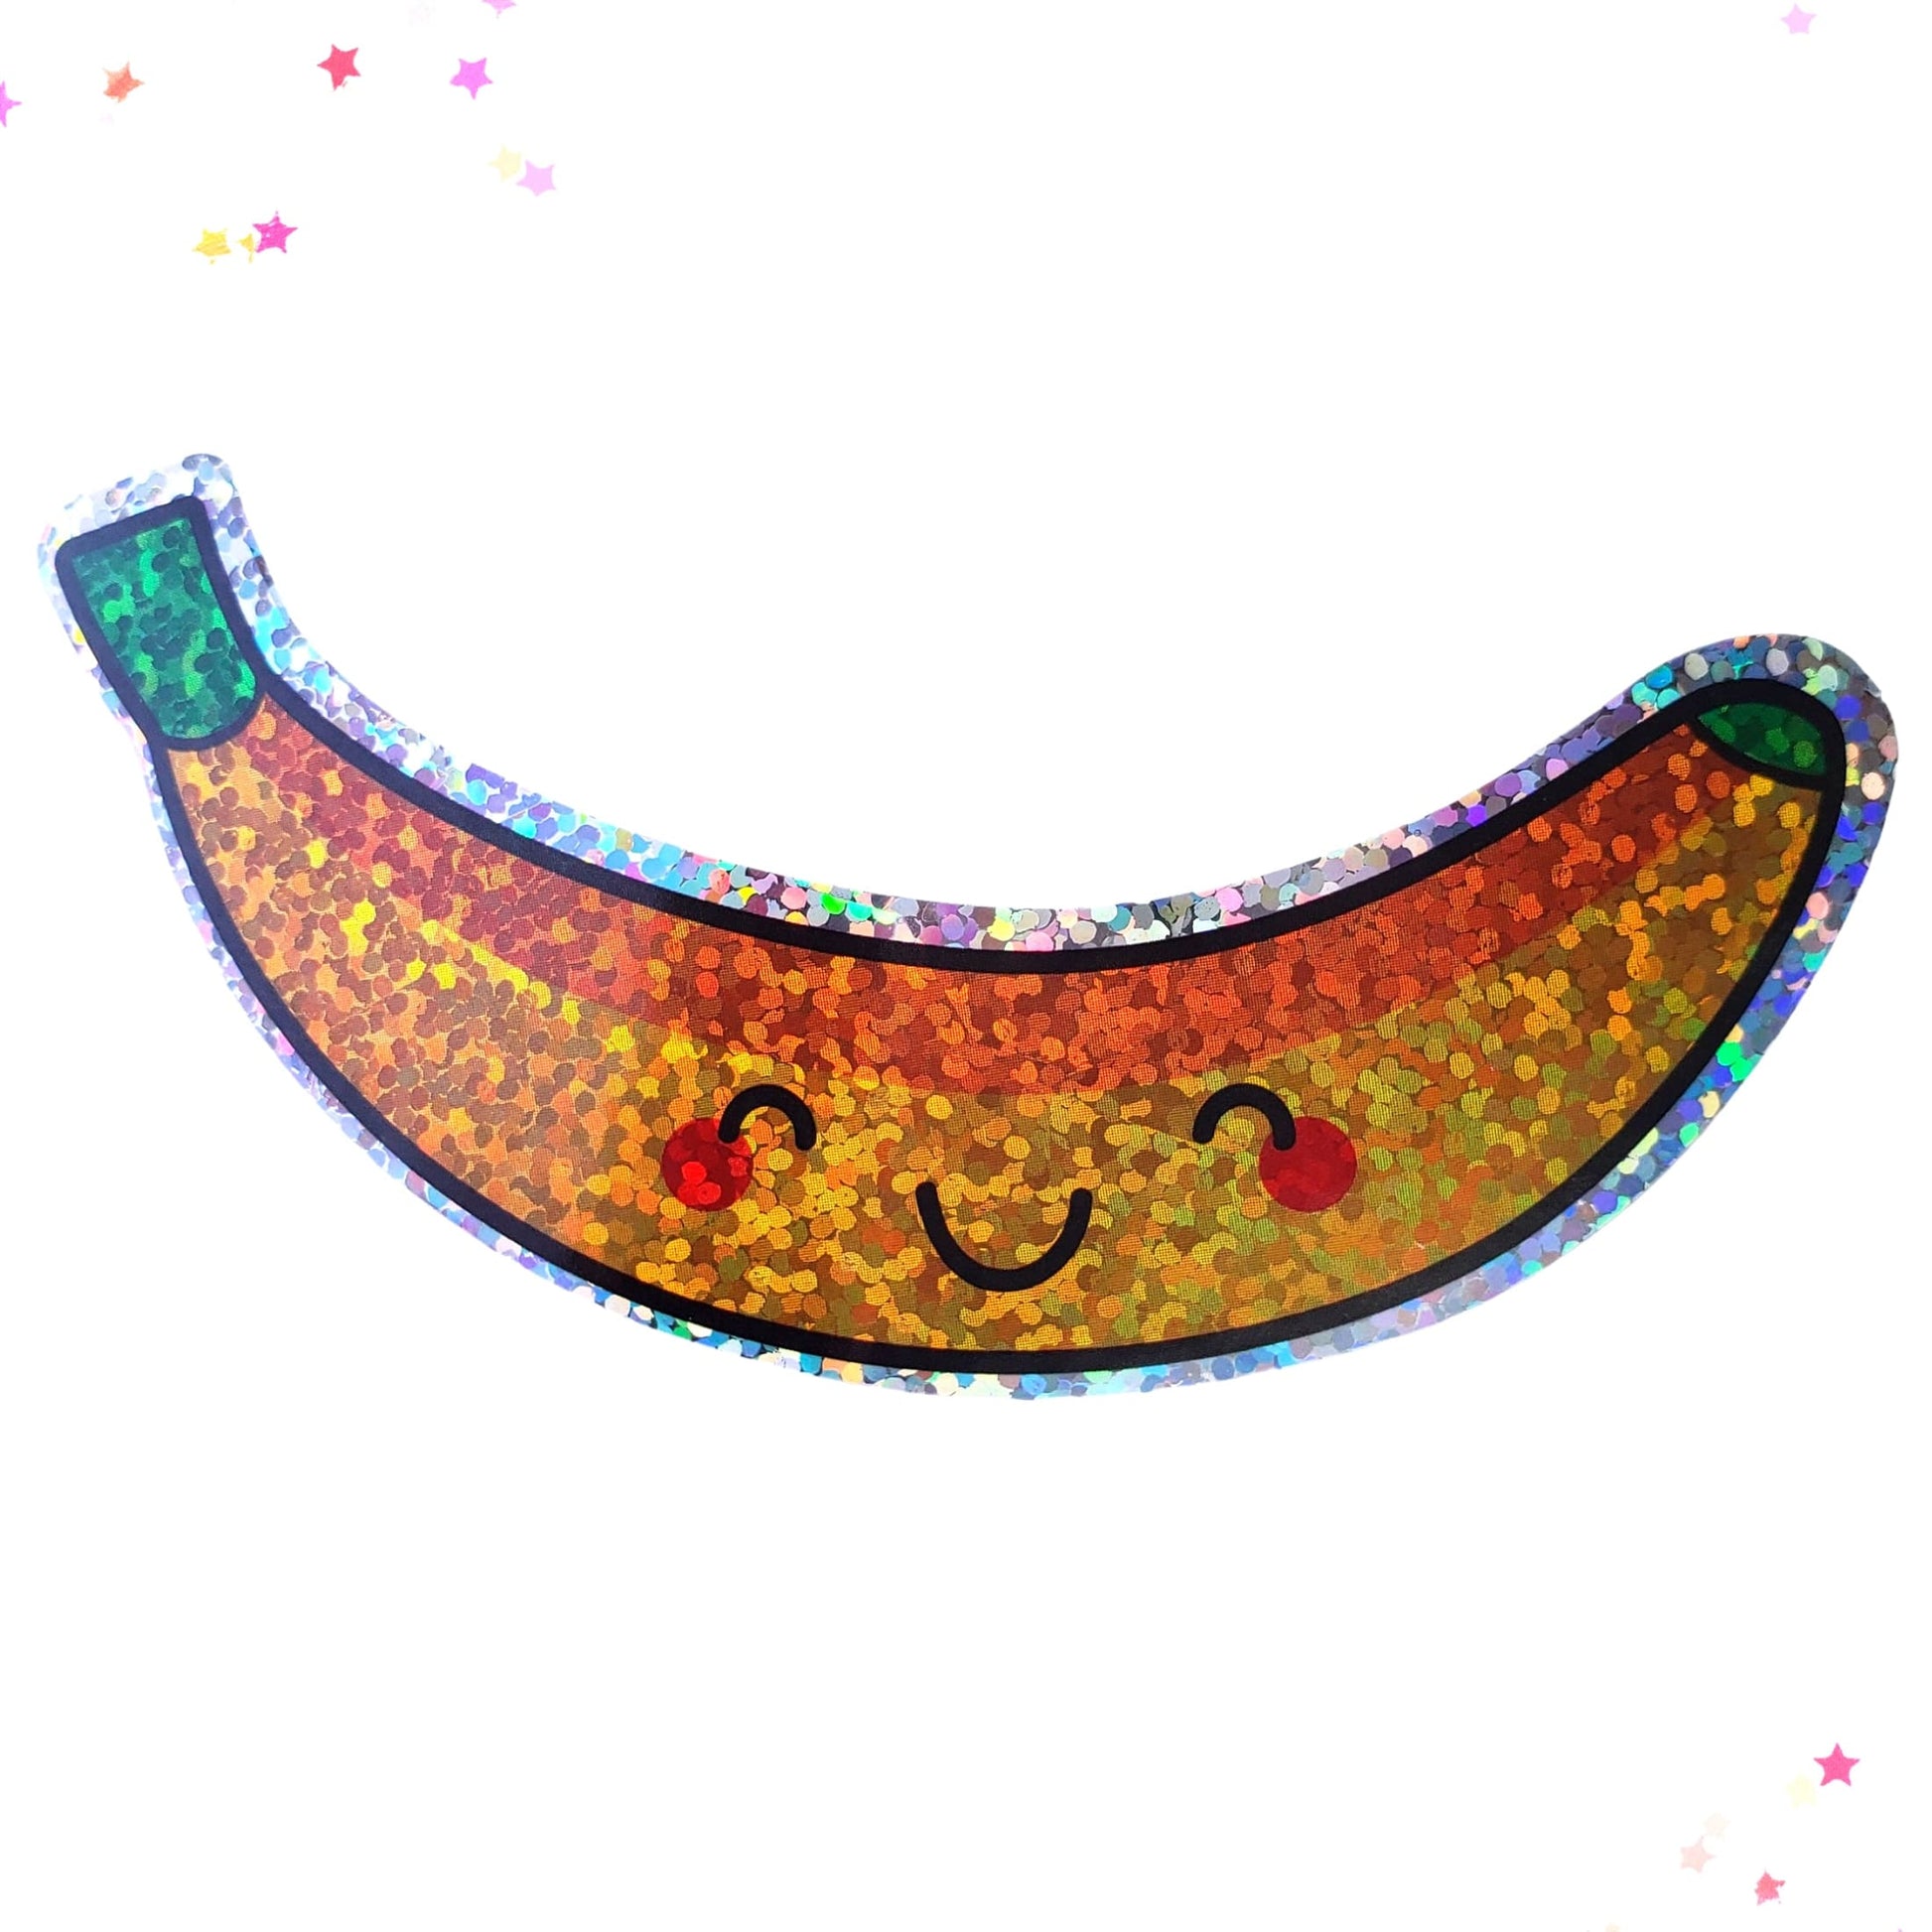 Premium Sticker - Sparkly Holographic Glitter Kawaii Banana from Confetti Kitty, Only 2.00